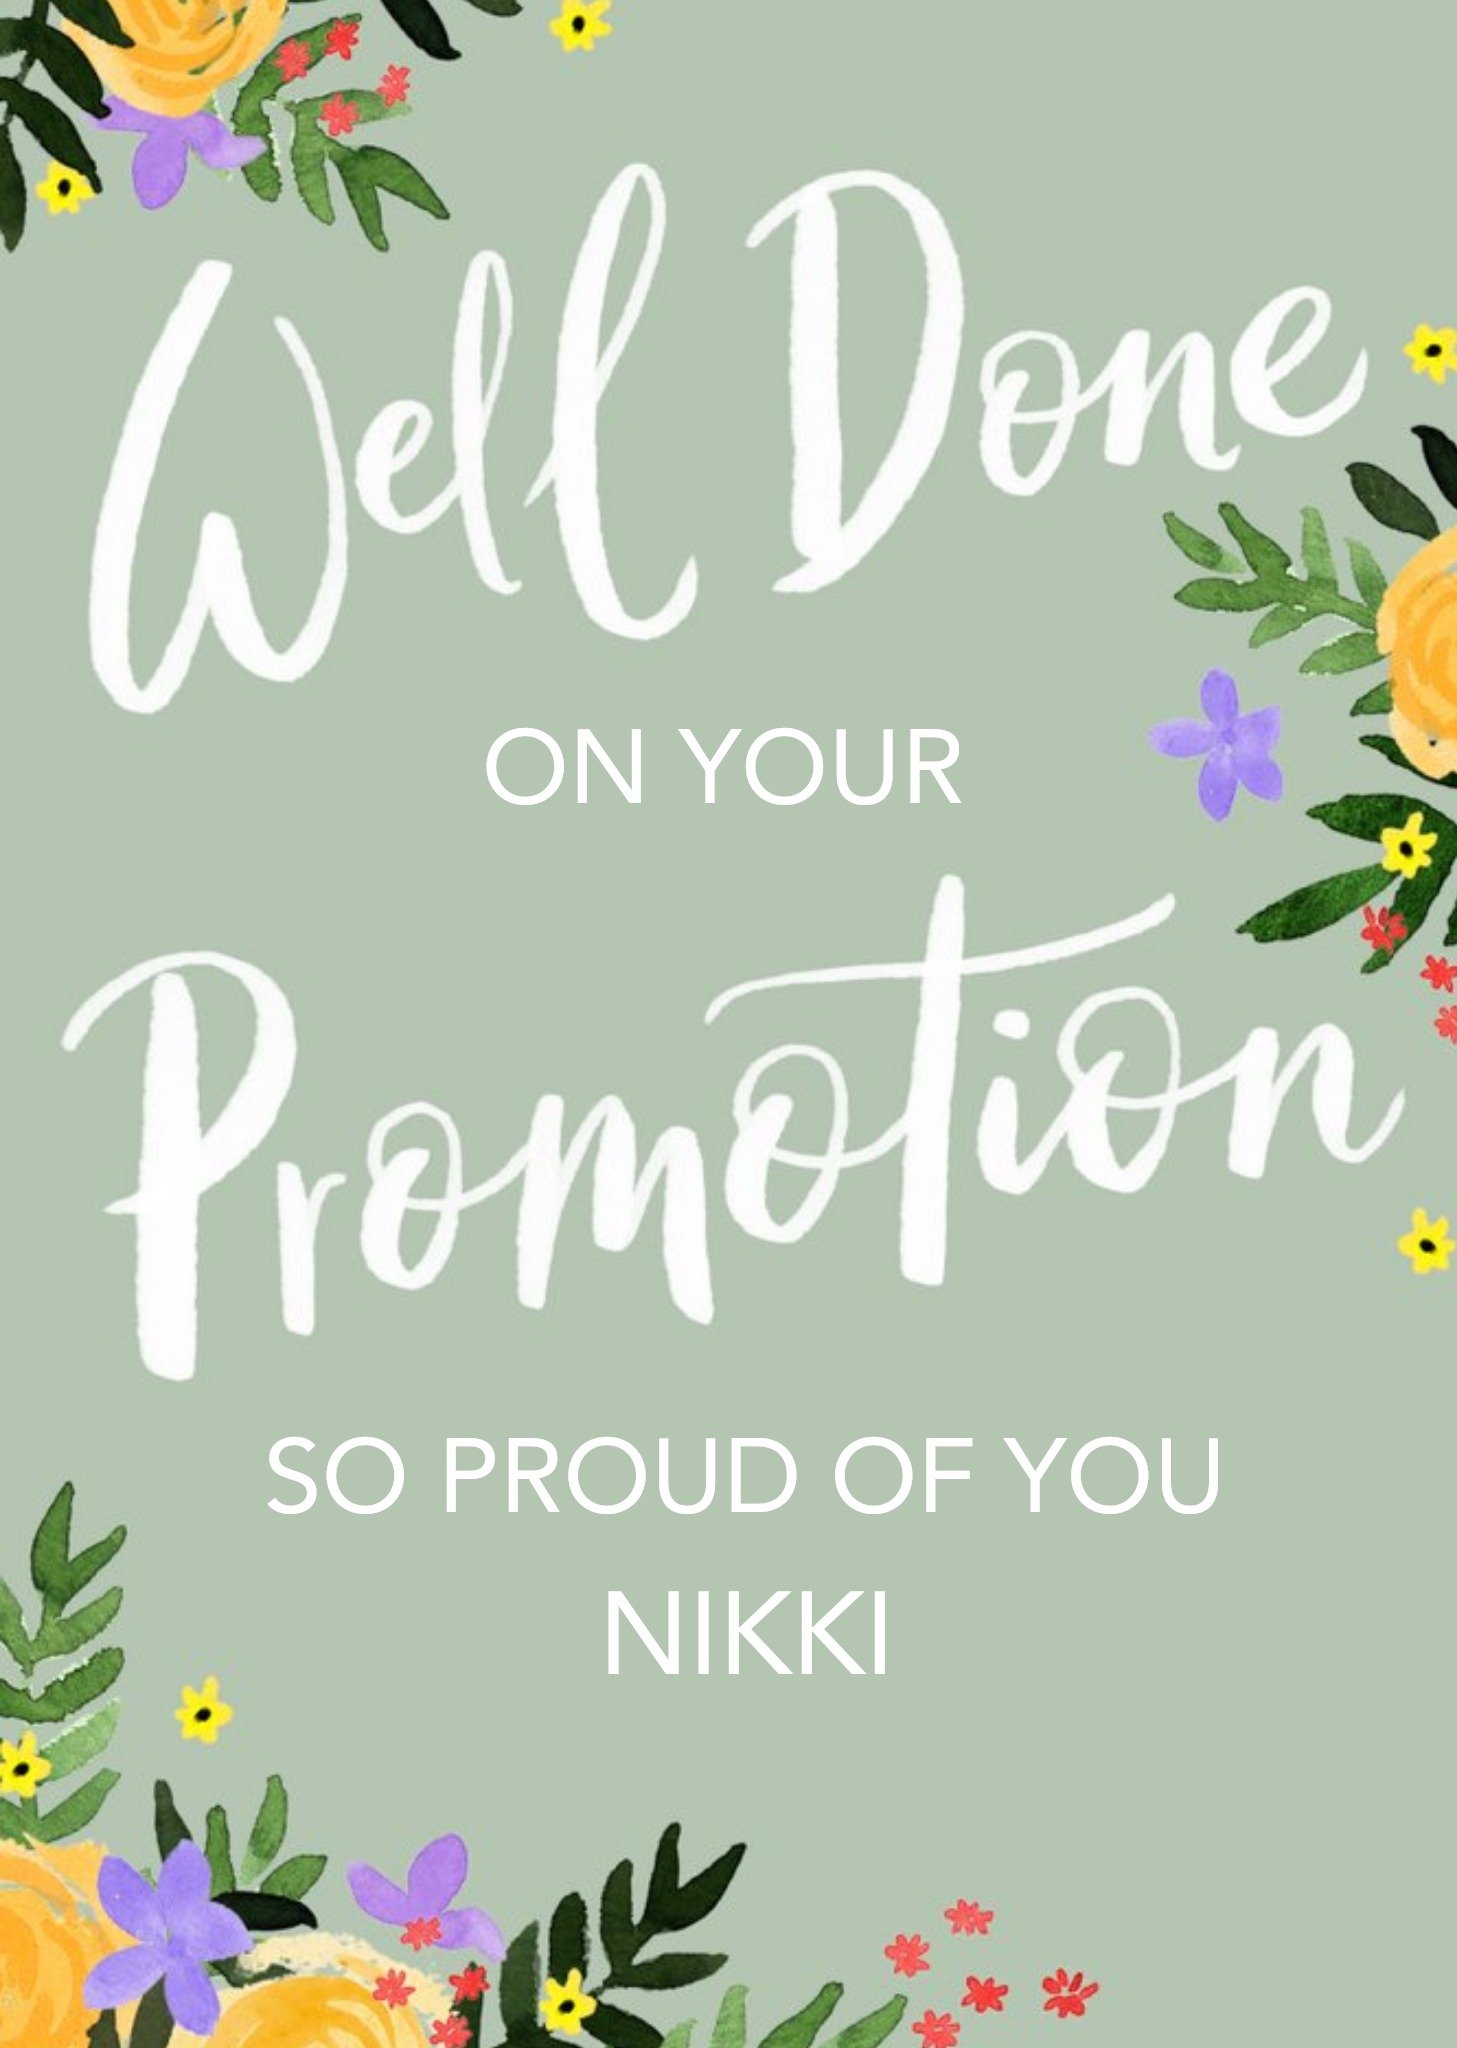 Okey Dokey Design Floral Illustration Surround Text On A Green Background Promotion Congratulations 